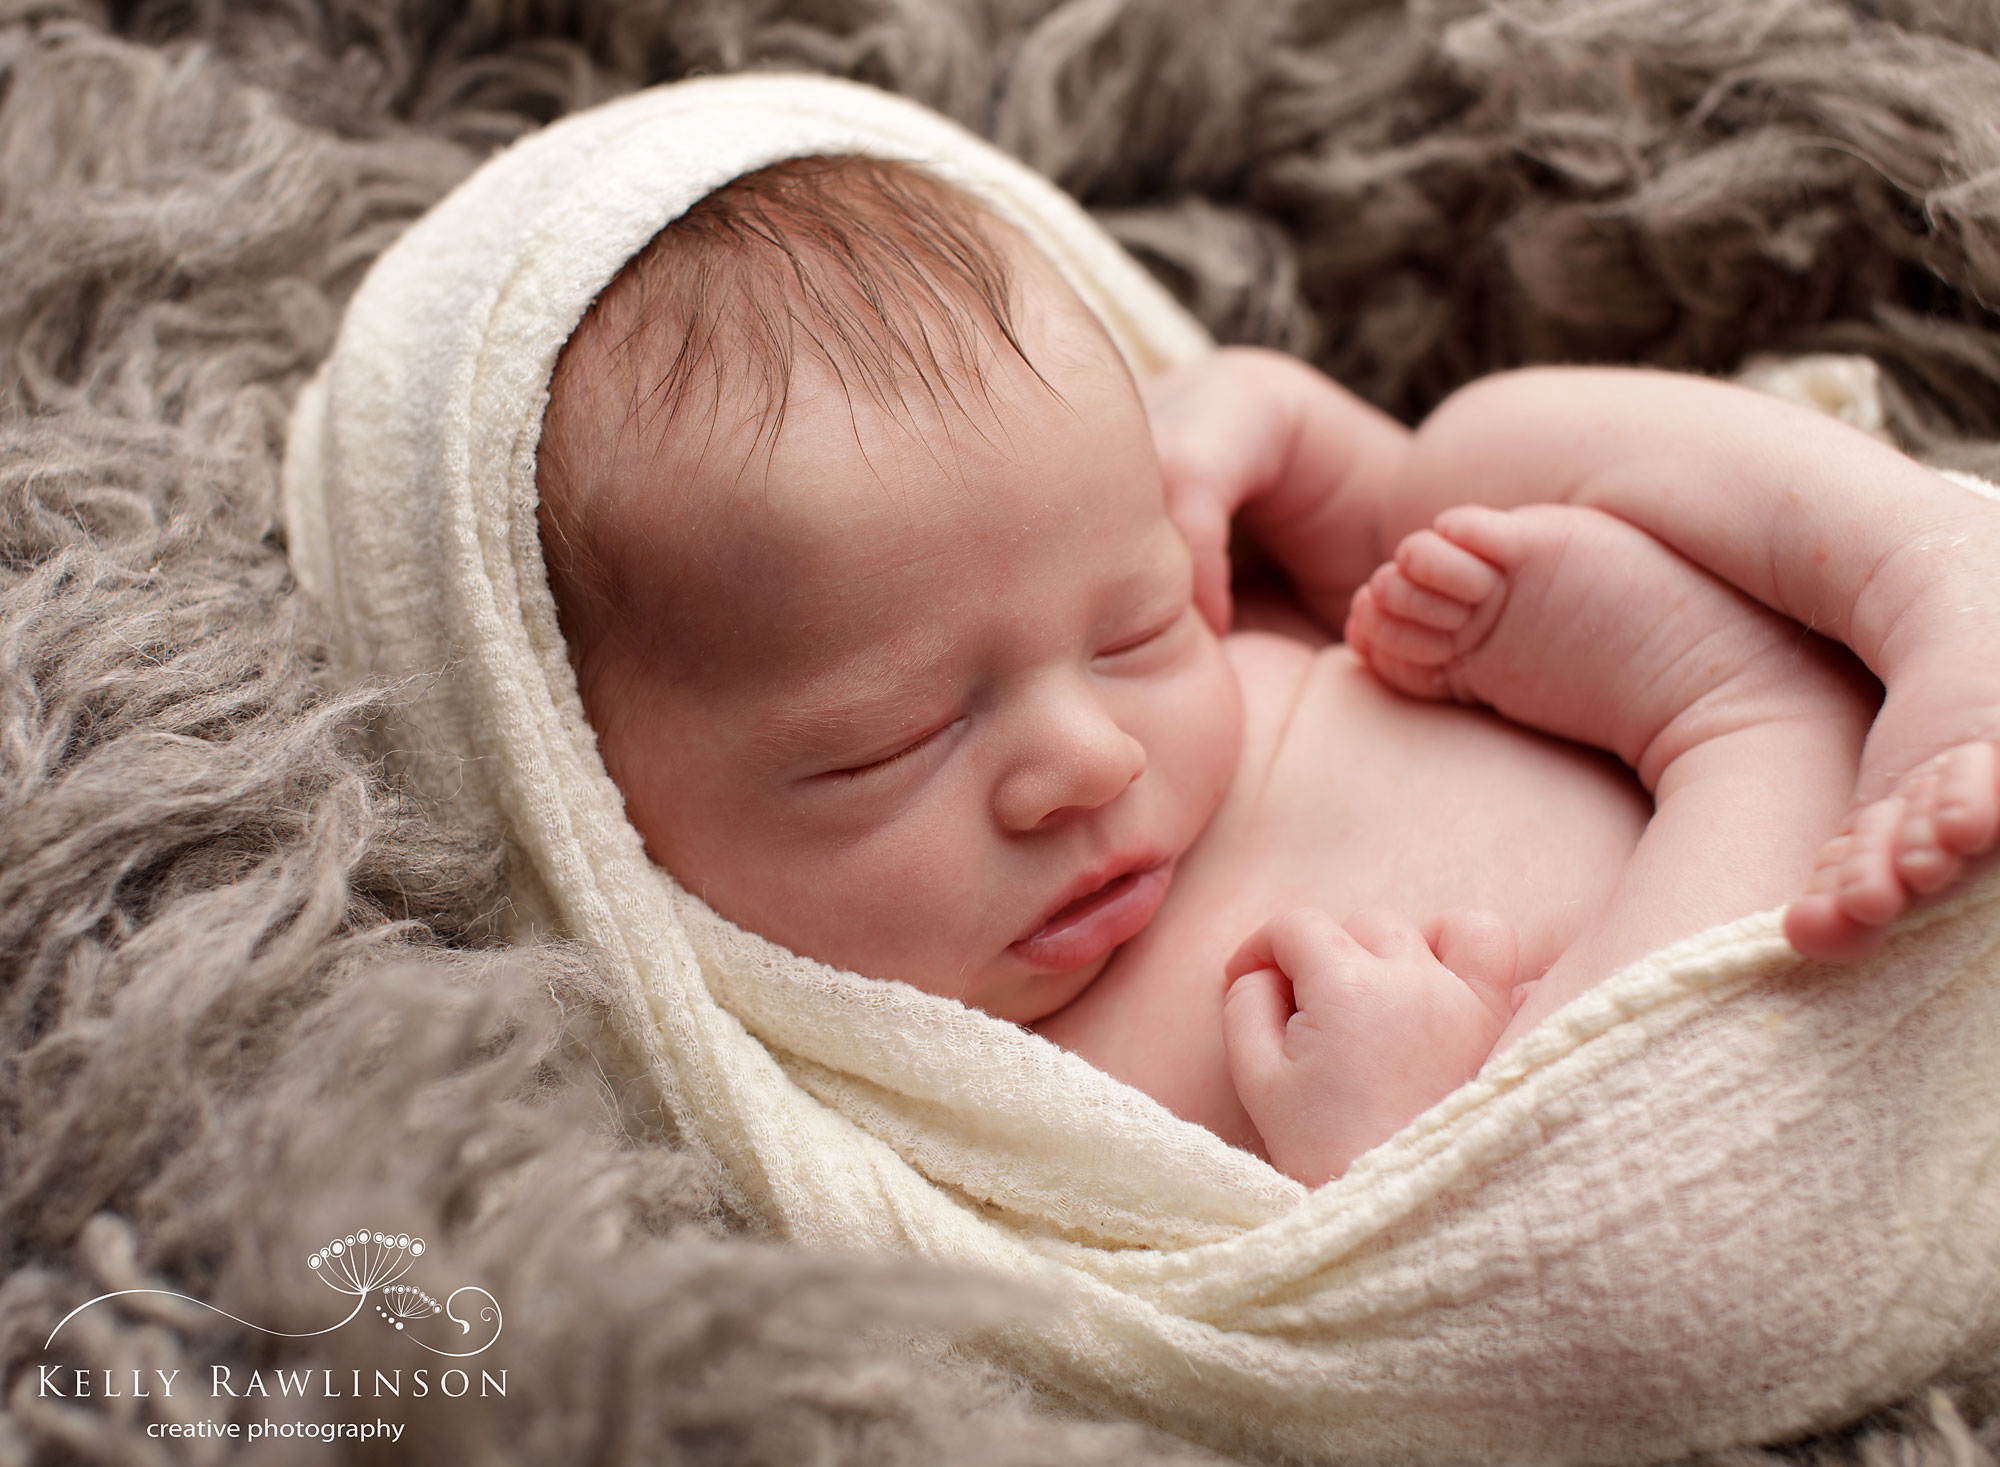 Awesome photo of baby wrapped in swaddle